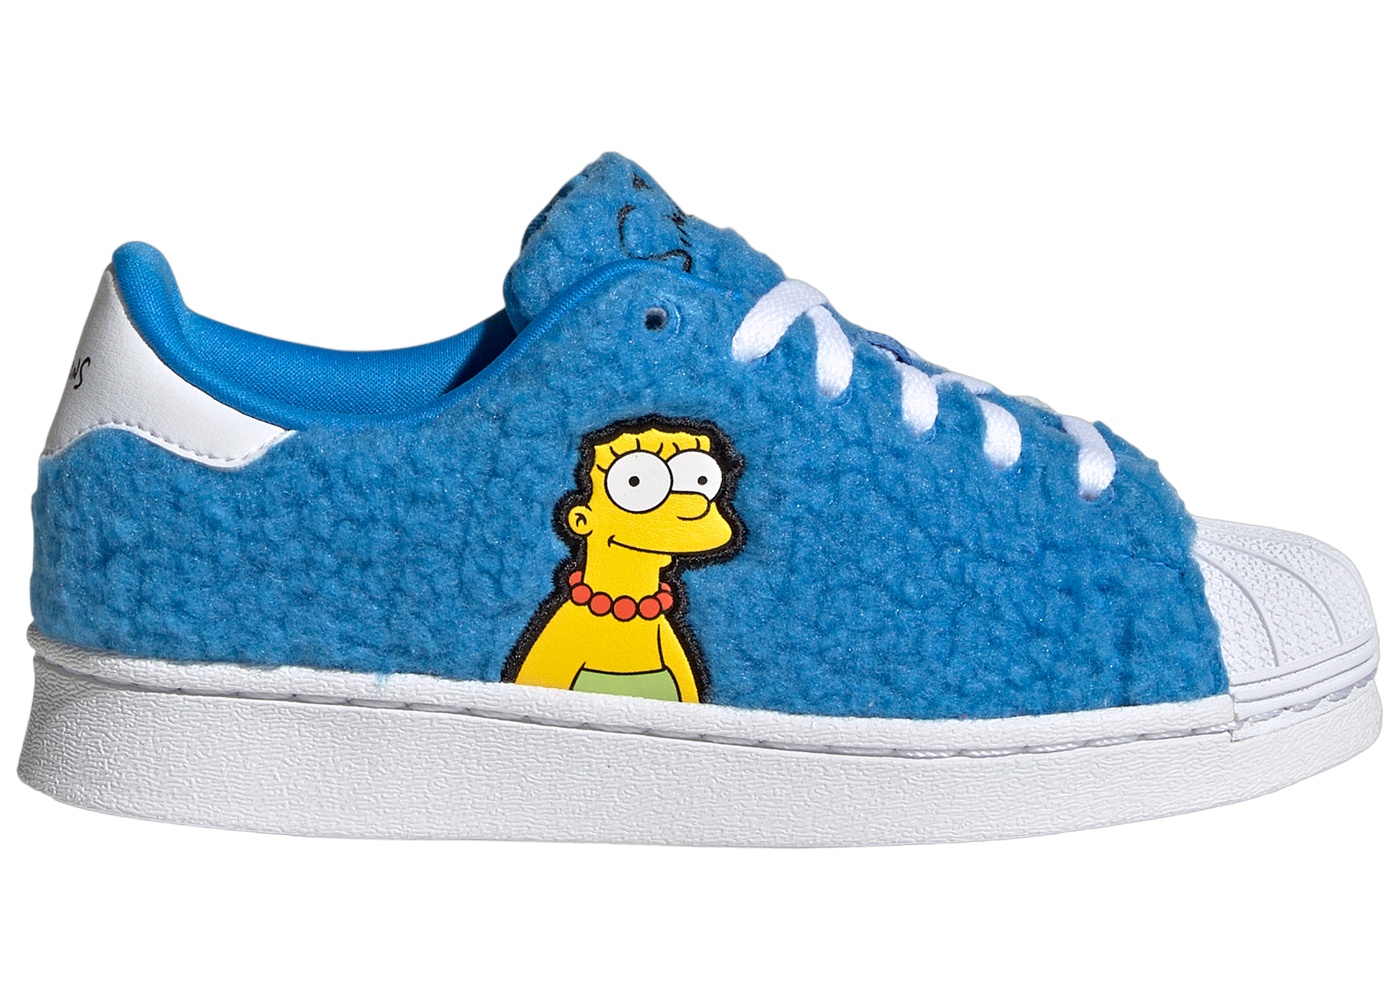 adidas Superstar The Simpsons Marge Cloud White Core Black (GS 